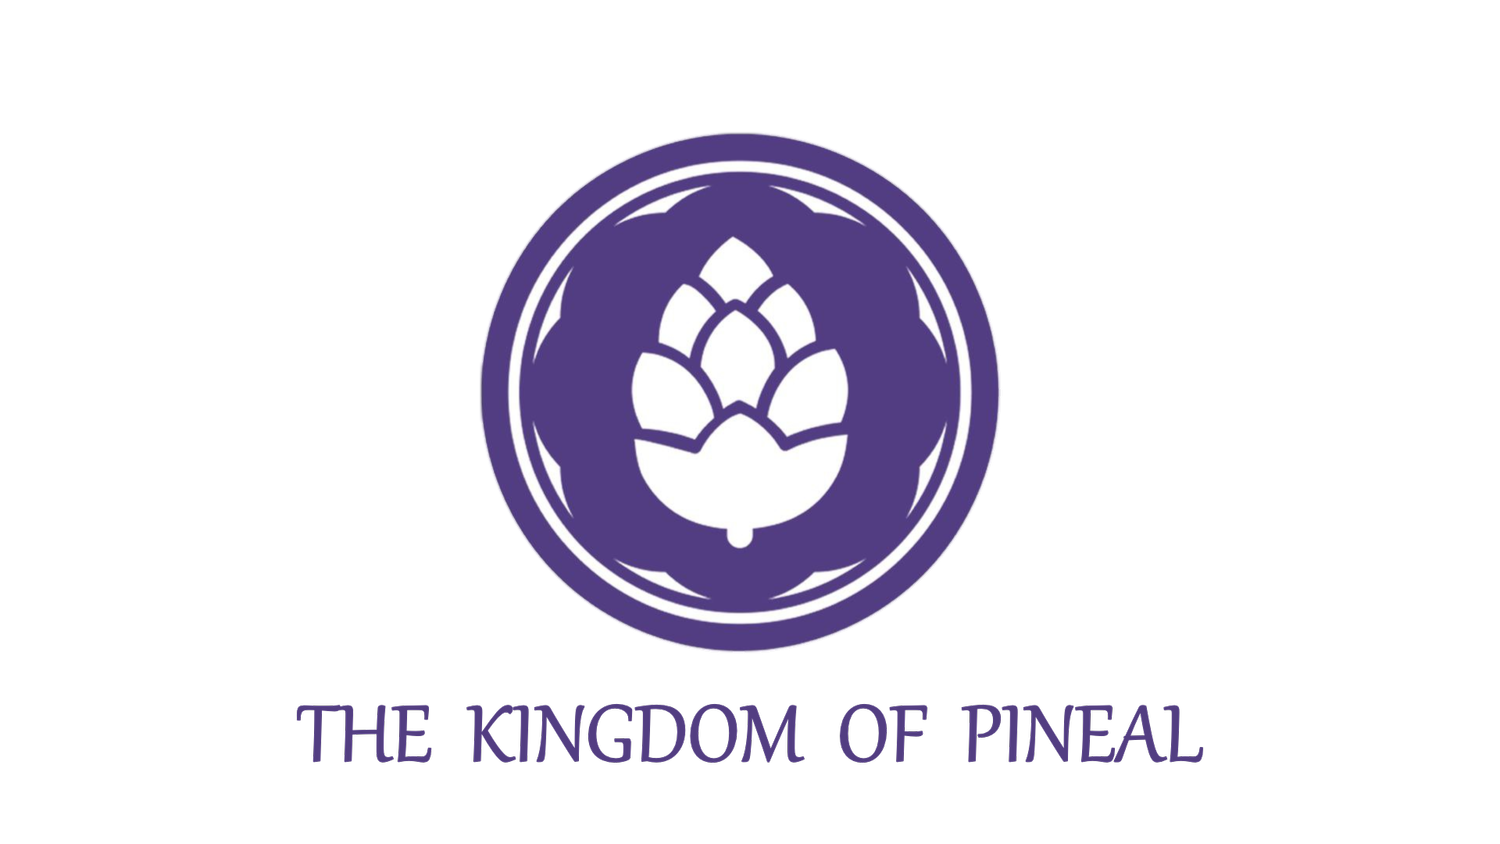 THE KINGDOM OF PINEAL